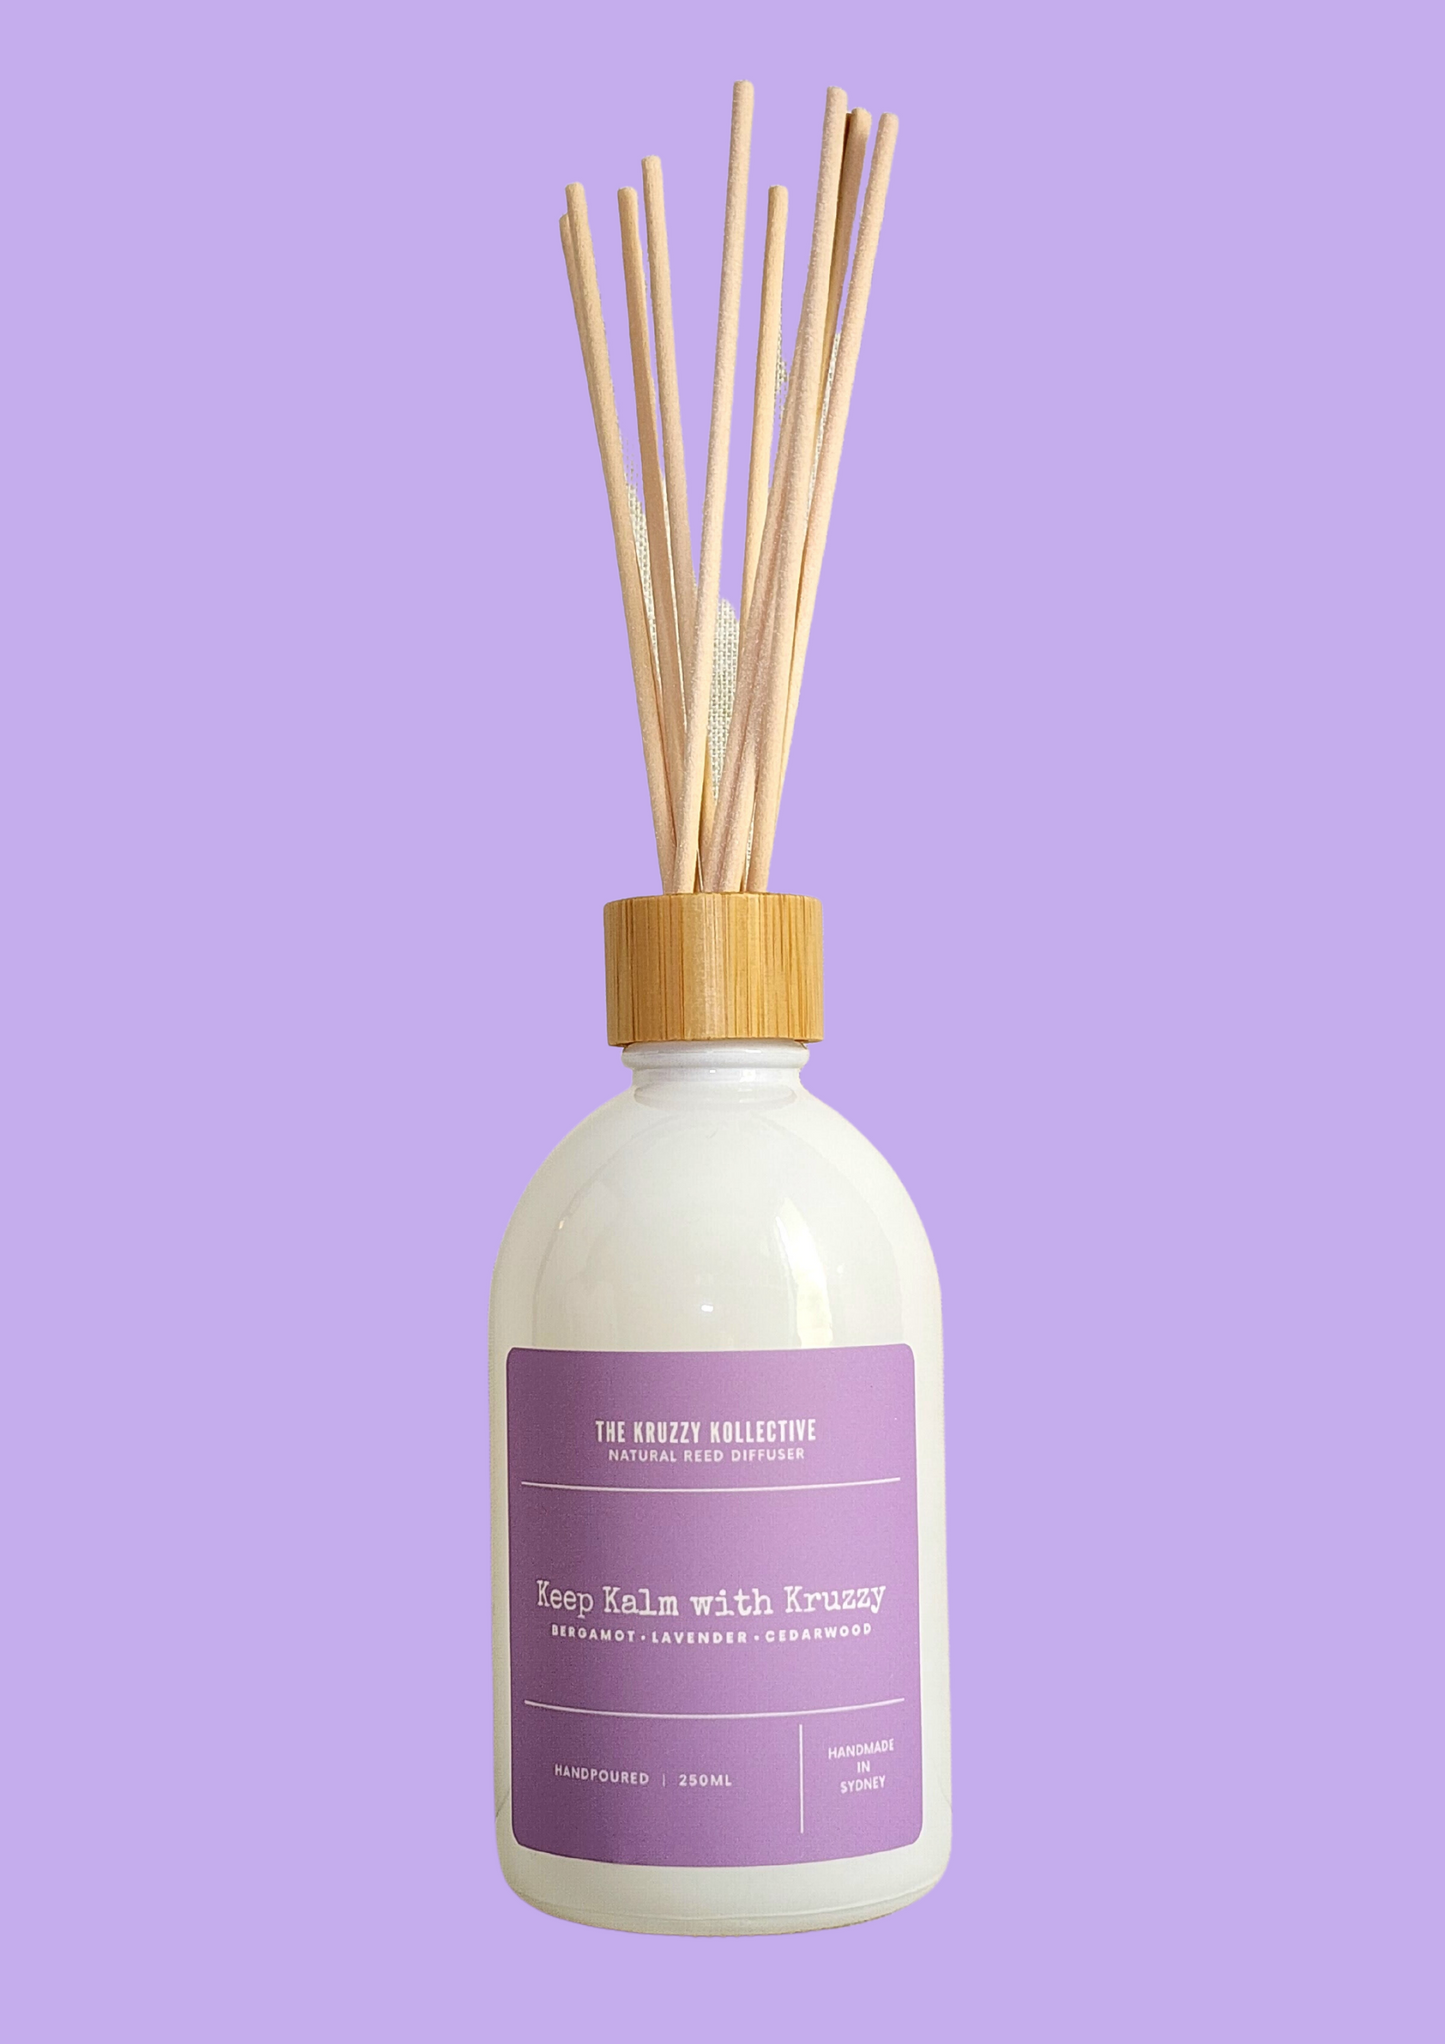 home fragrance natural reed diffuser best home scented fragrance lavender relaxation